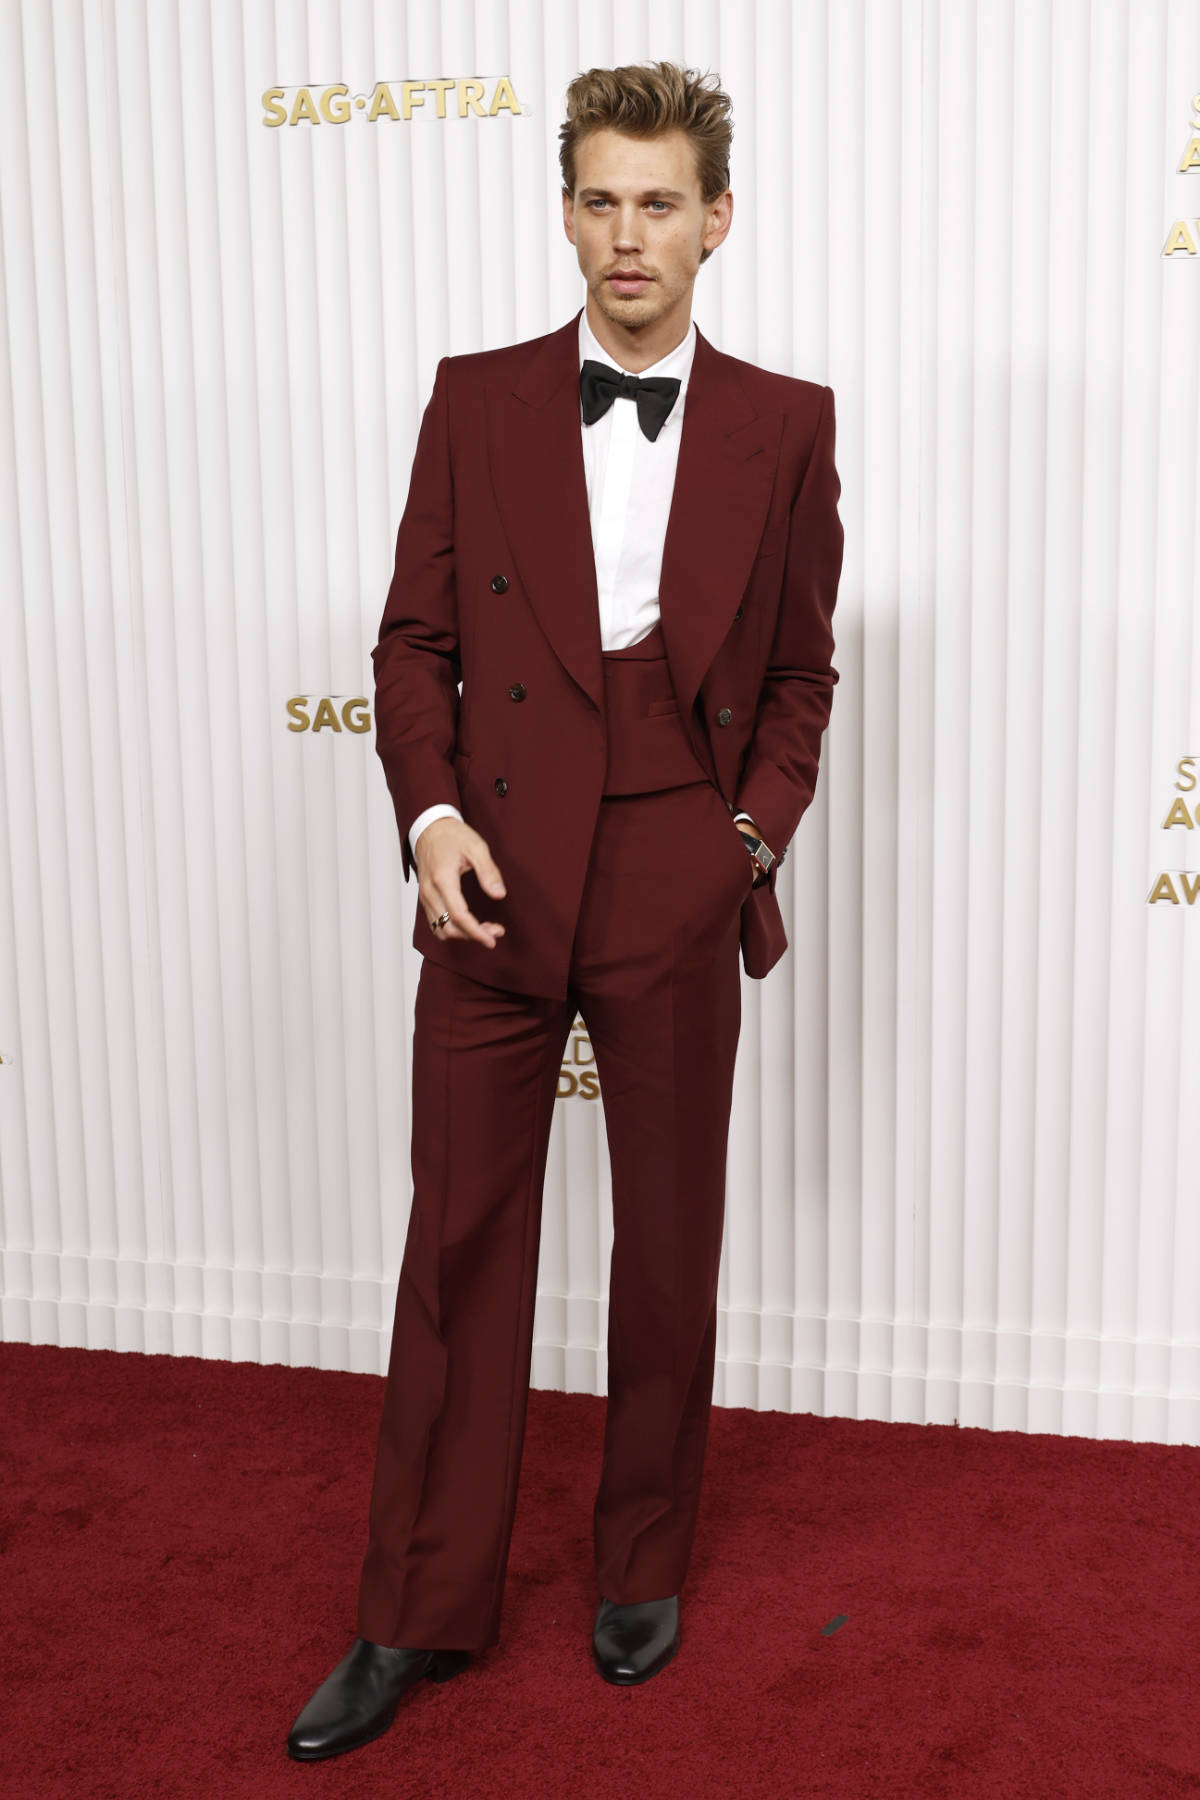 VIPs In Gucci At The 29th Annual Screen Actors Guild Awards